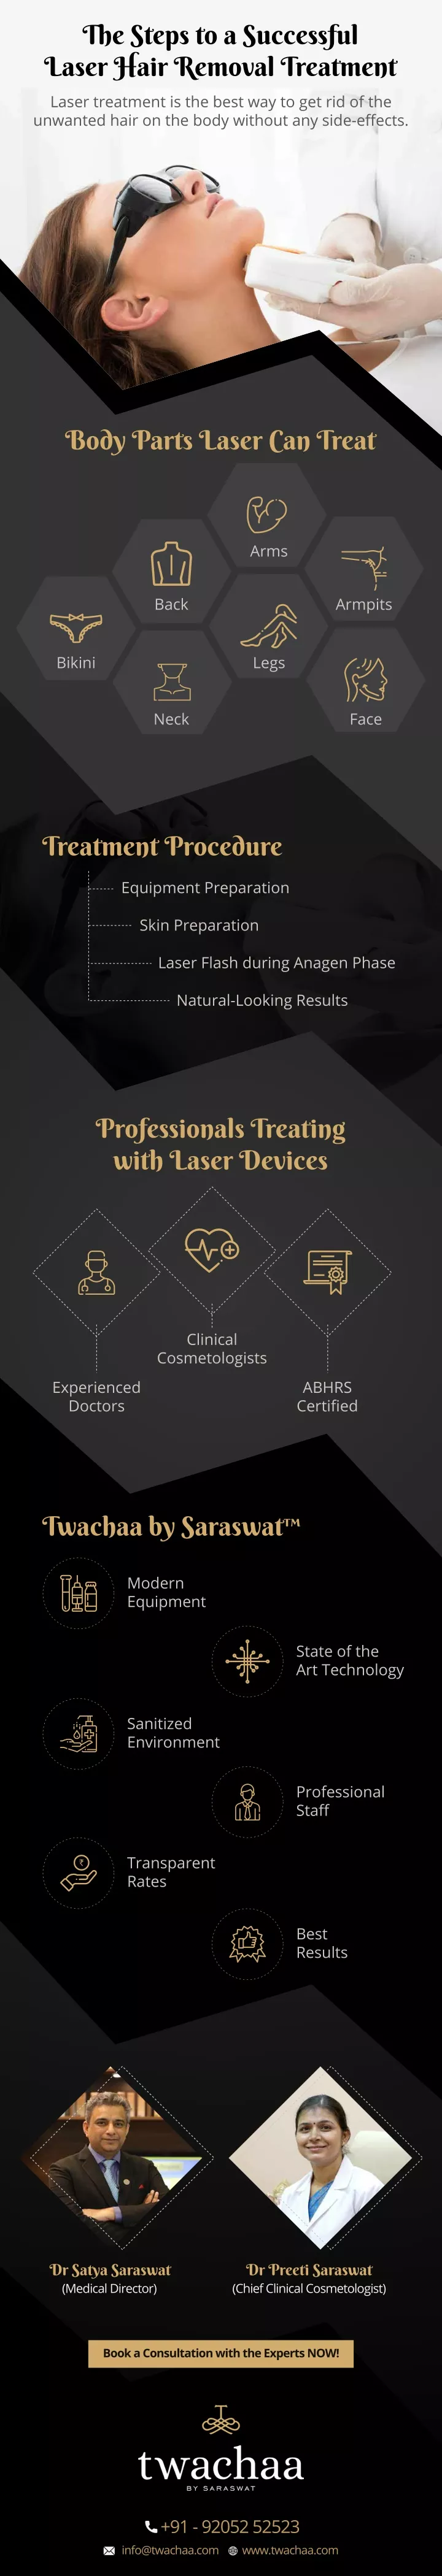 the steps to a successful laser hair removal